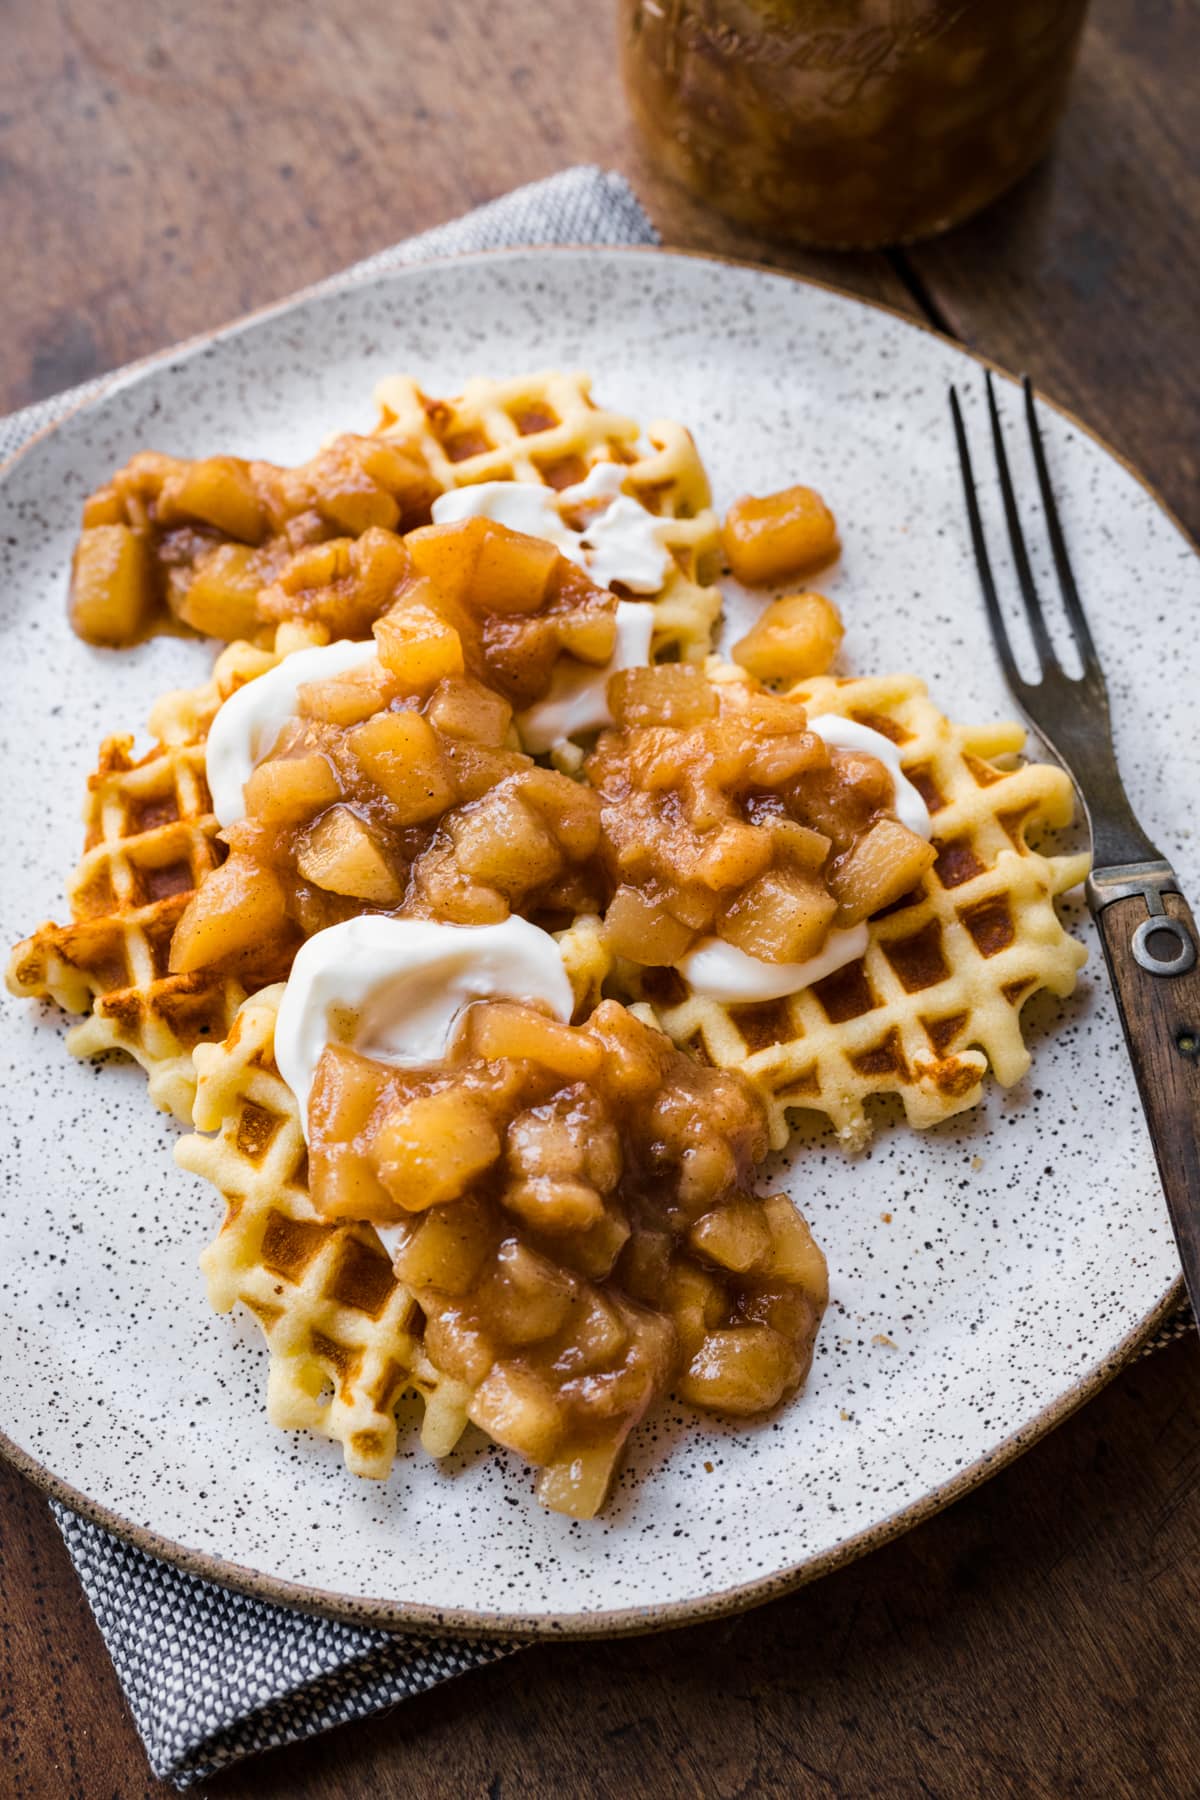 Pear compote and yogurt on waffles. 